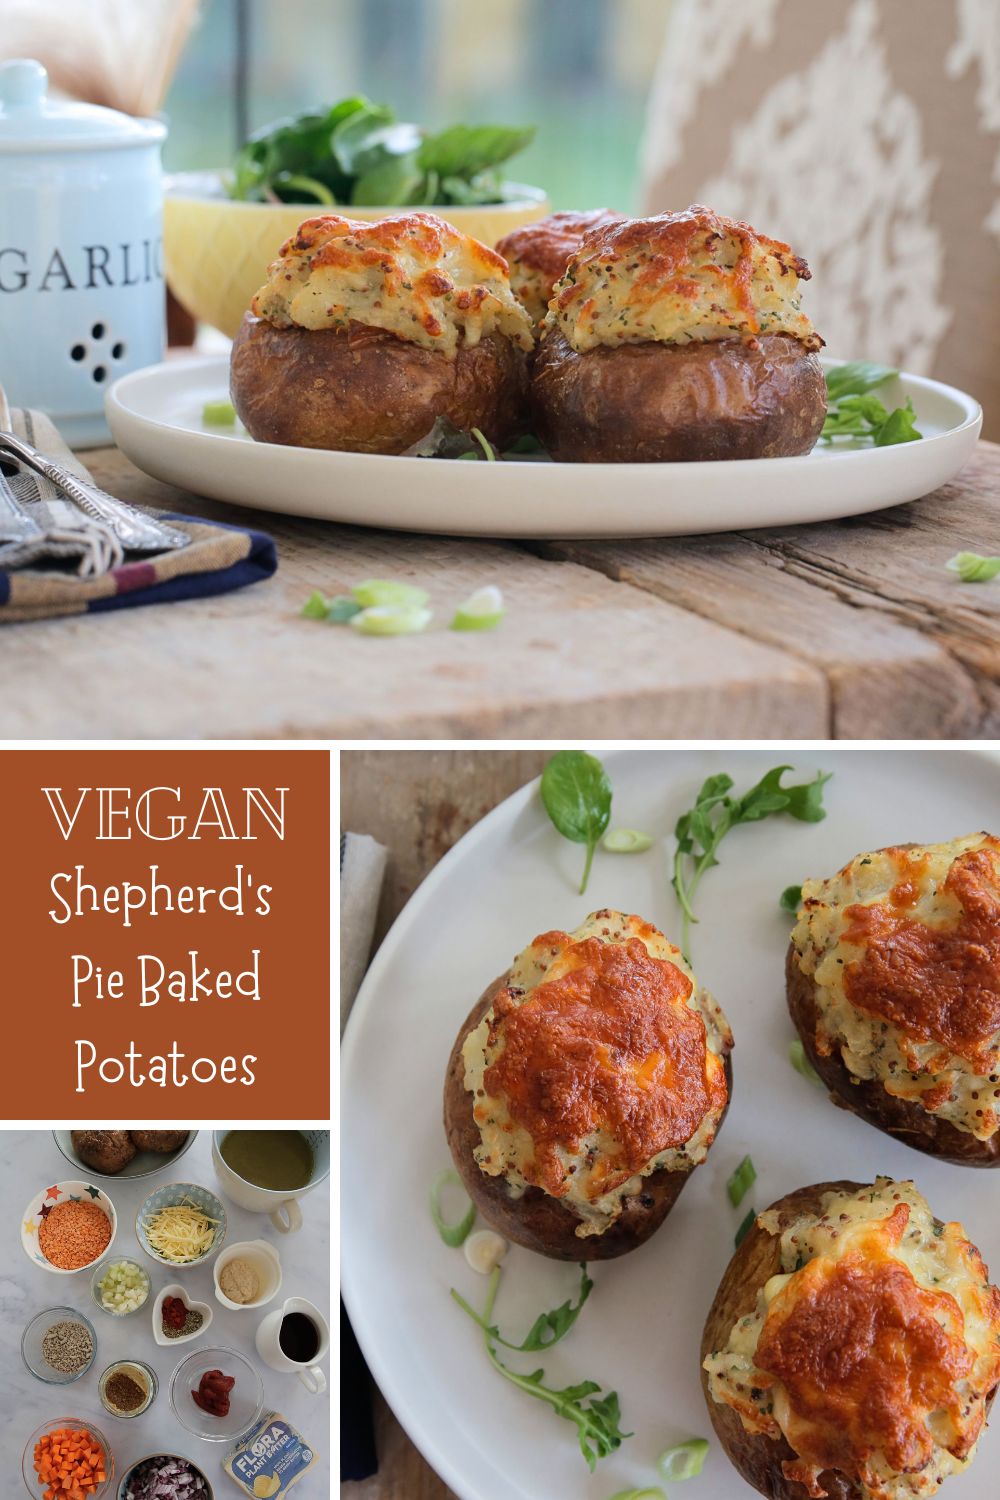 Vegan shepherds pie stuffed baked potatoes combines two great comfort foods for a make ahead lunch or hearty dinner when paired with extra veggies or crisp salad! #ovenbakedpotatoes #potatorecipes #twicebakedpotatoes #veganshepherdspie